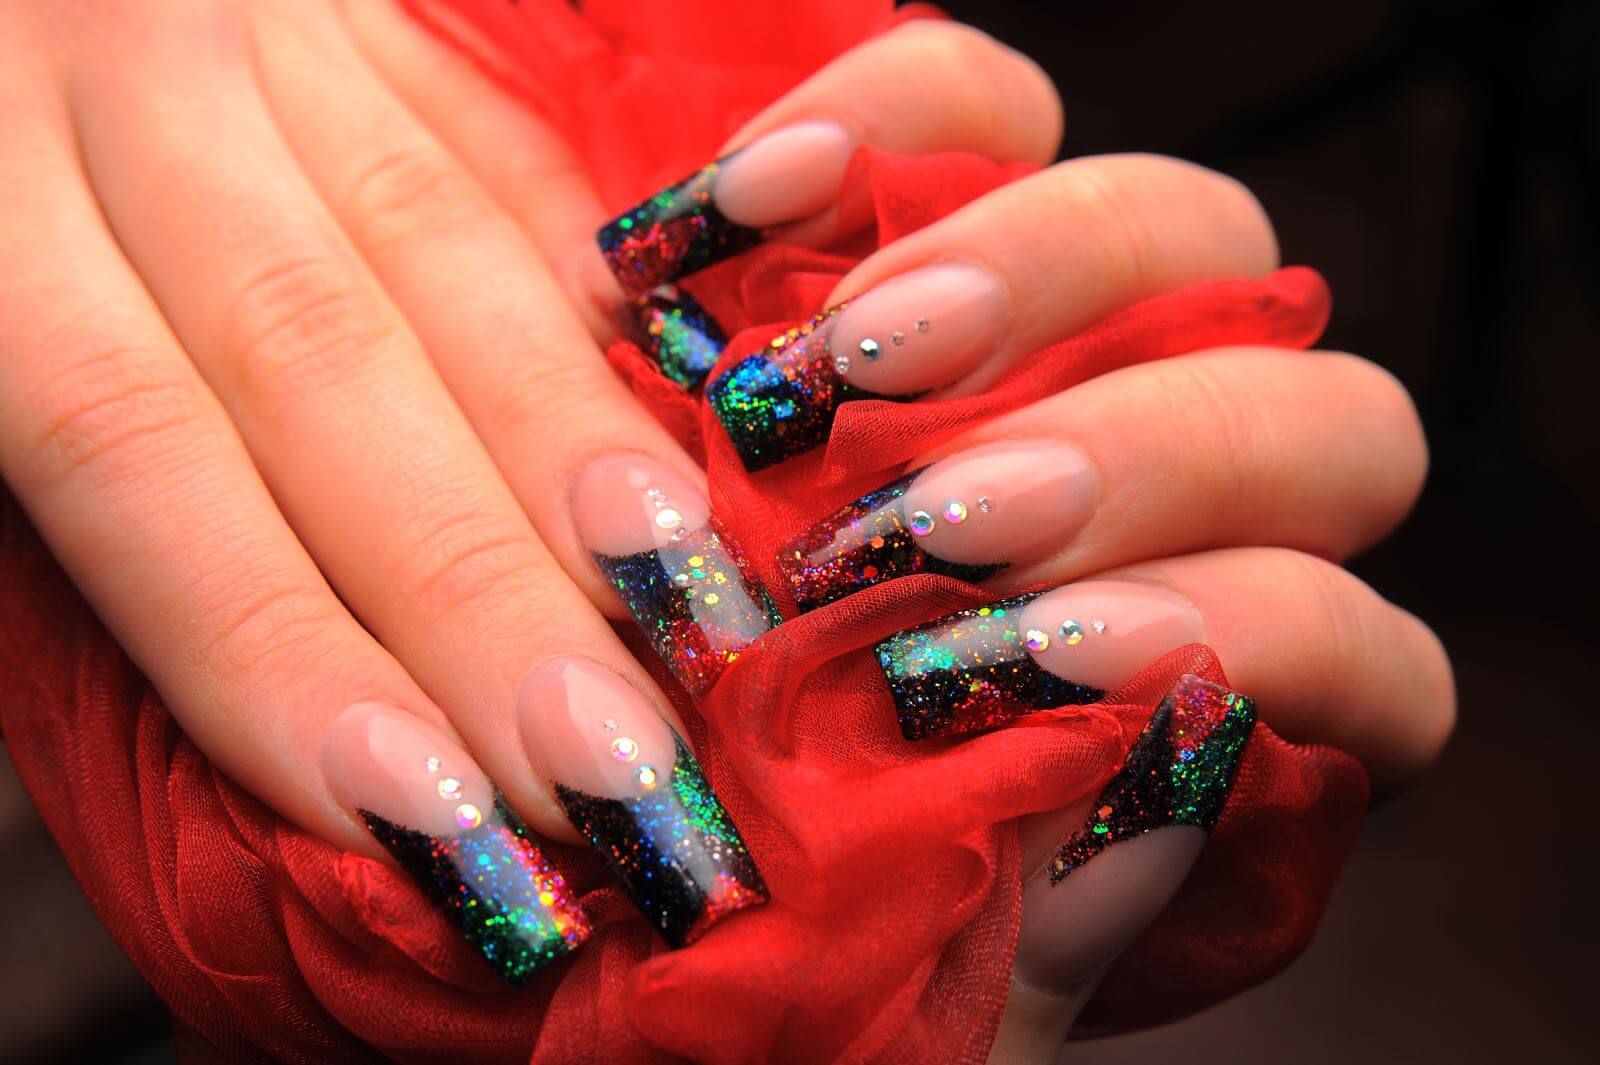 3. 30+ Dope Nail Designs That Will Make You Stand Out From The Crowd - wide 3